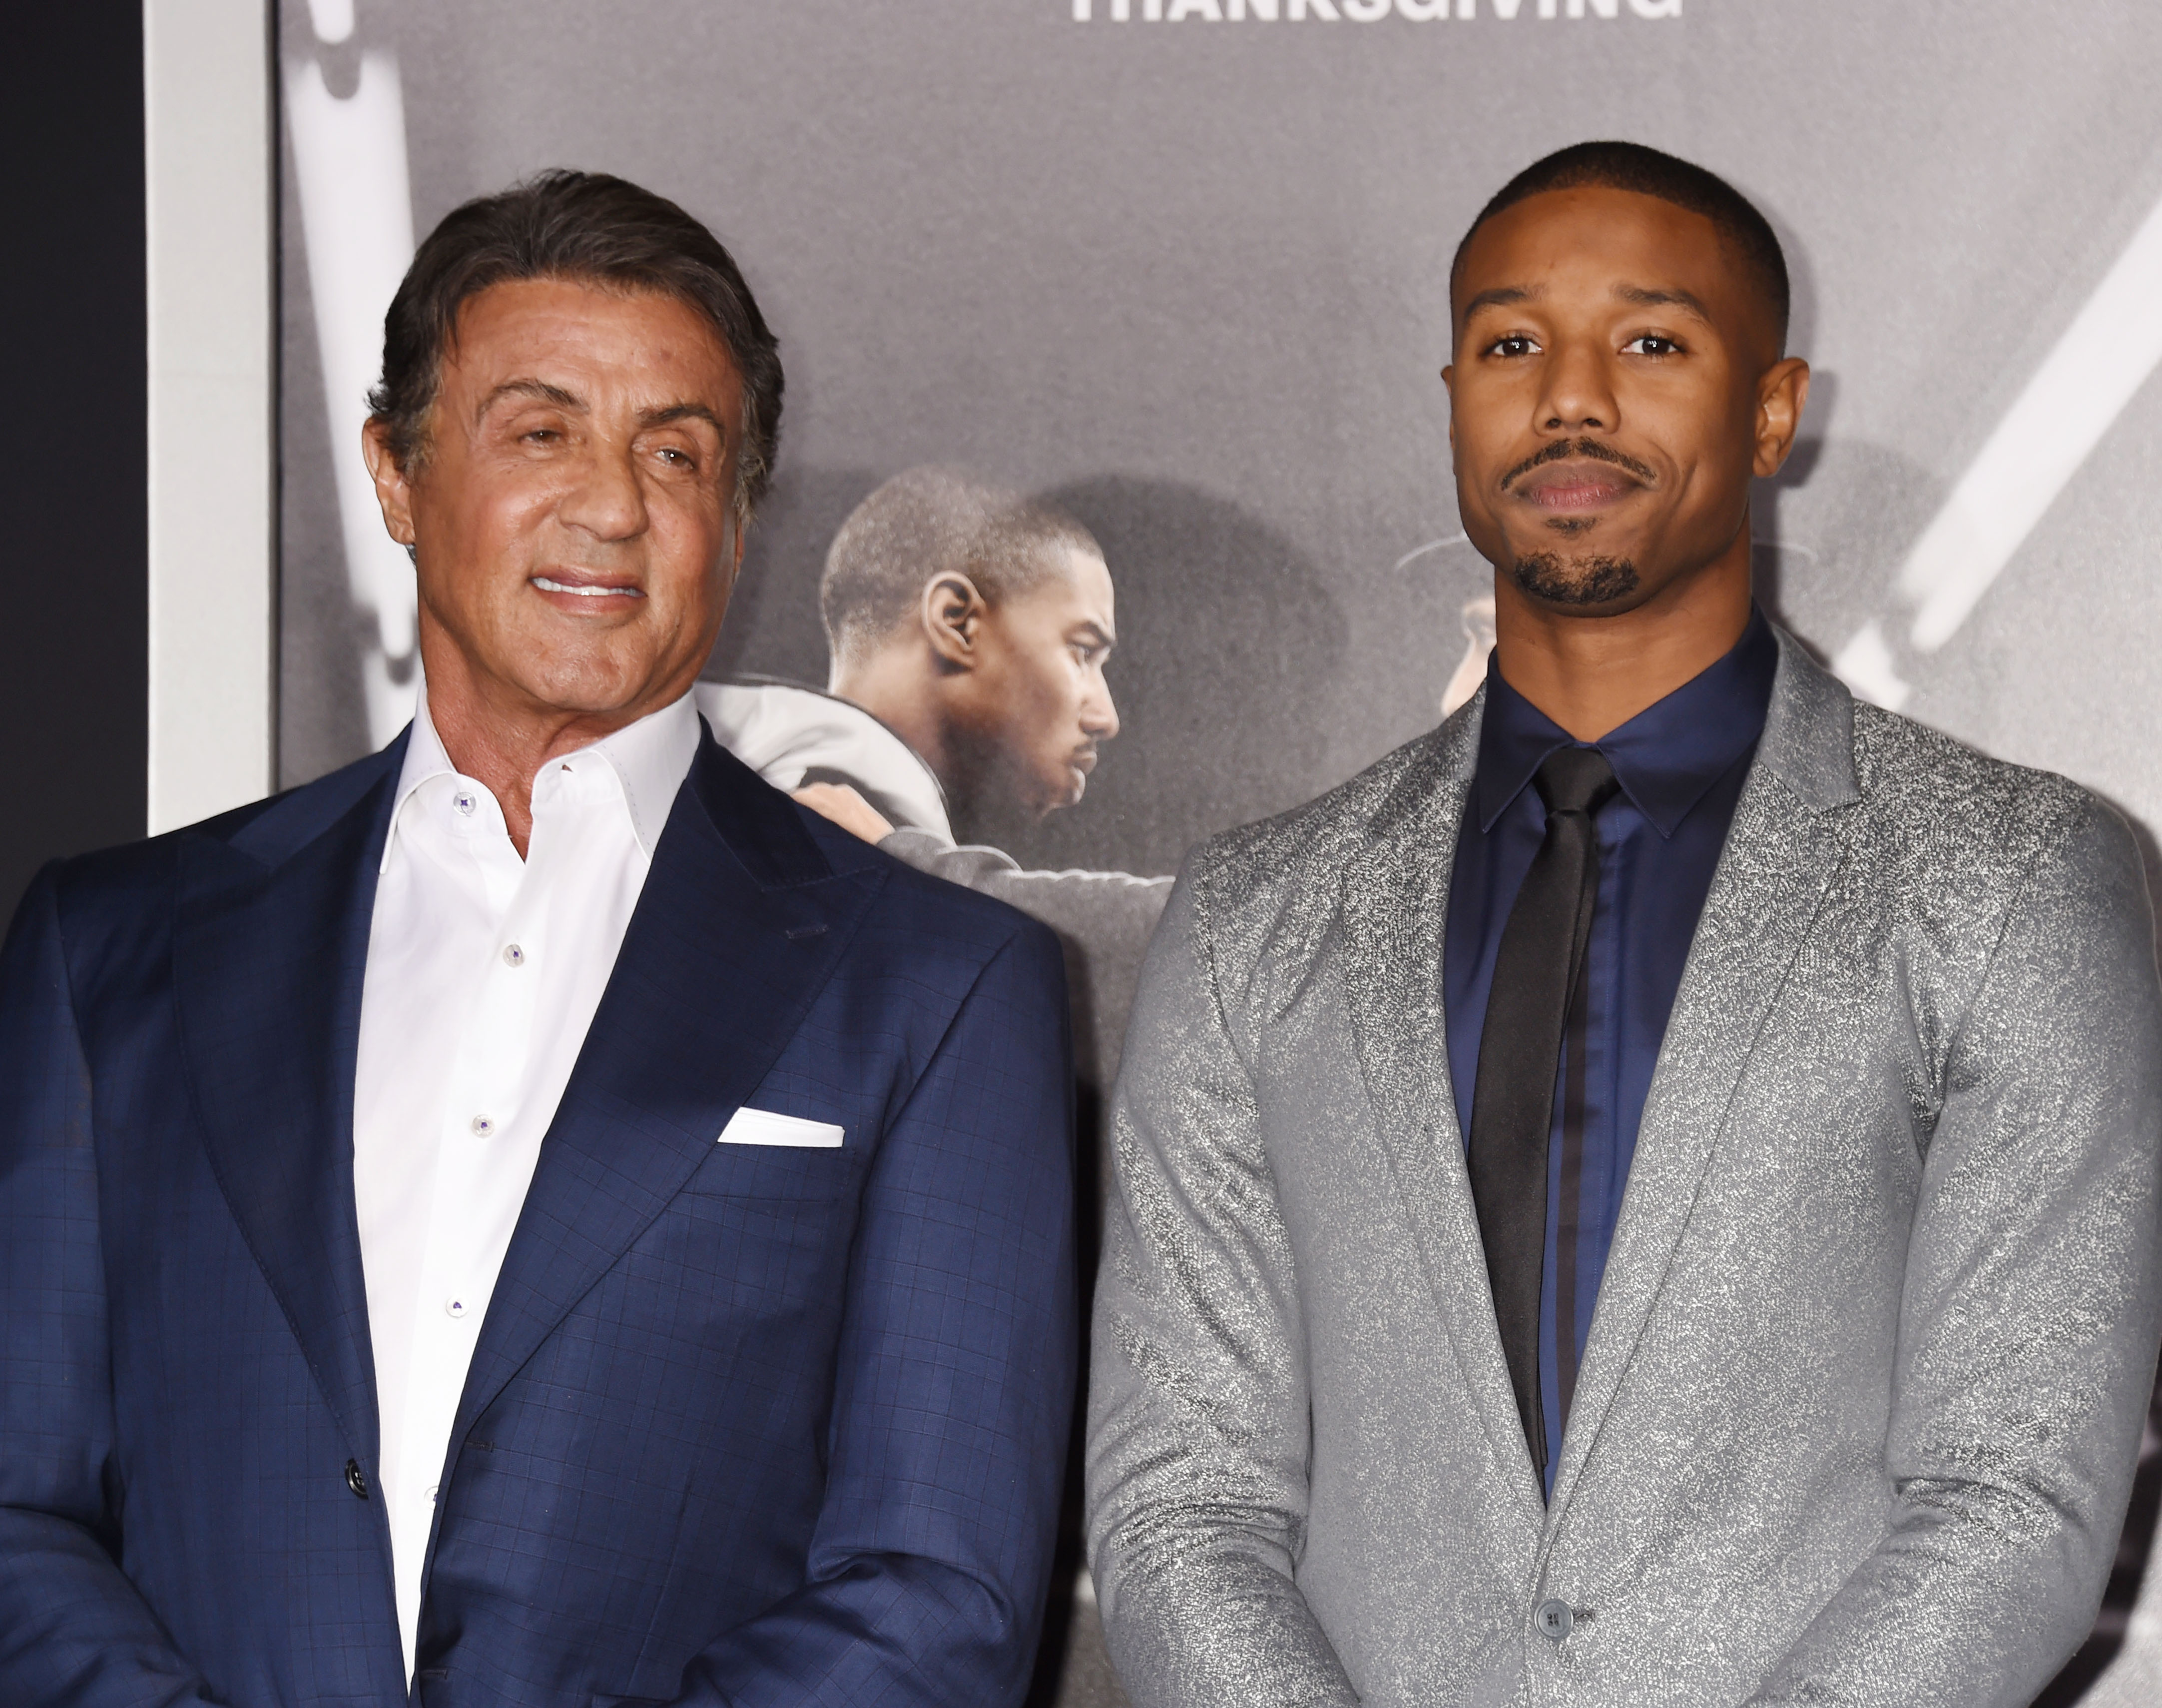 Premiere Of Warner Bros. Pictures' 'Creed' - Arrivals